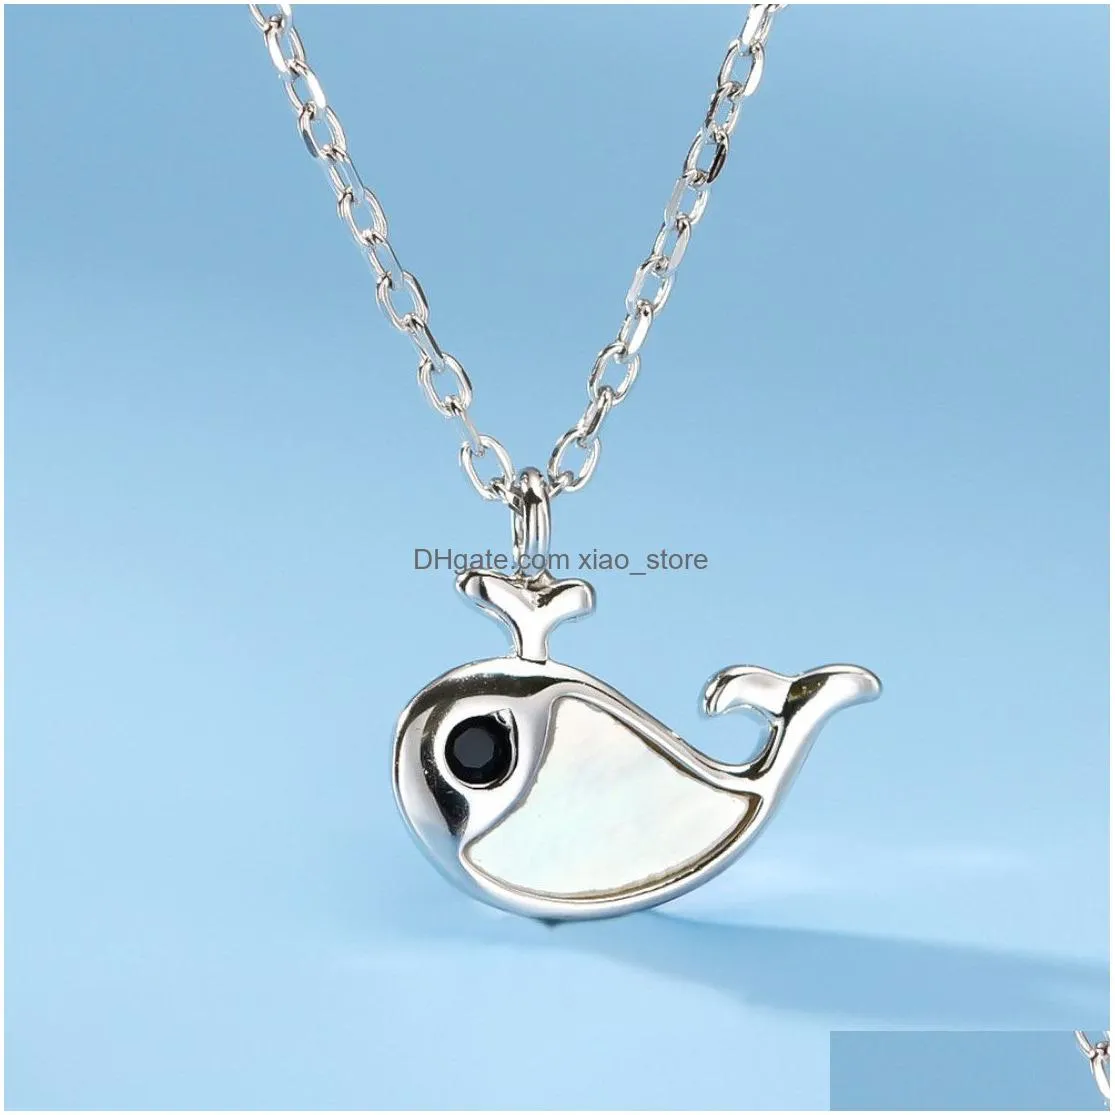 ocean necklace s925 sterling silver simple temperament fashion shell cute whale clavicle chain female accessories q0531